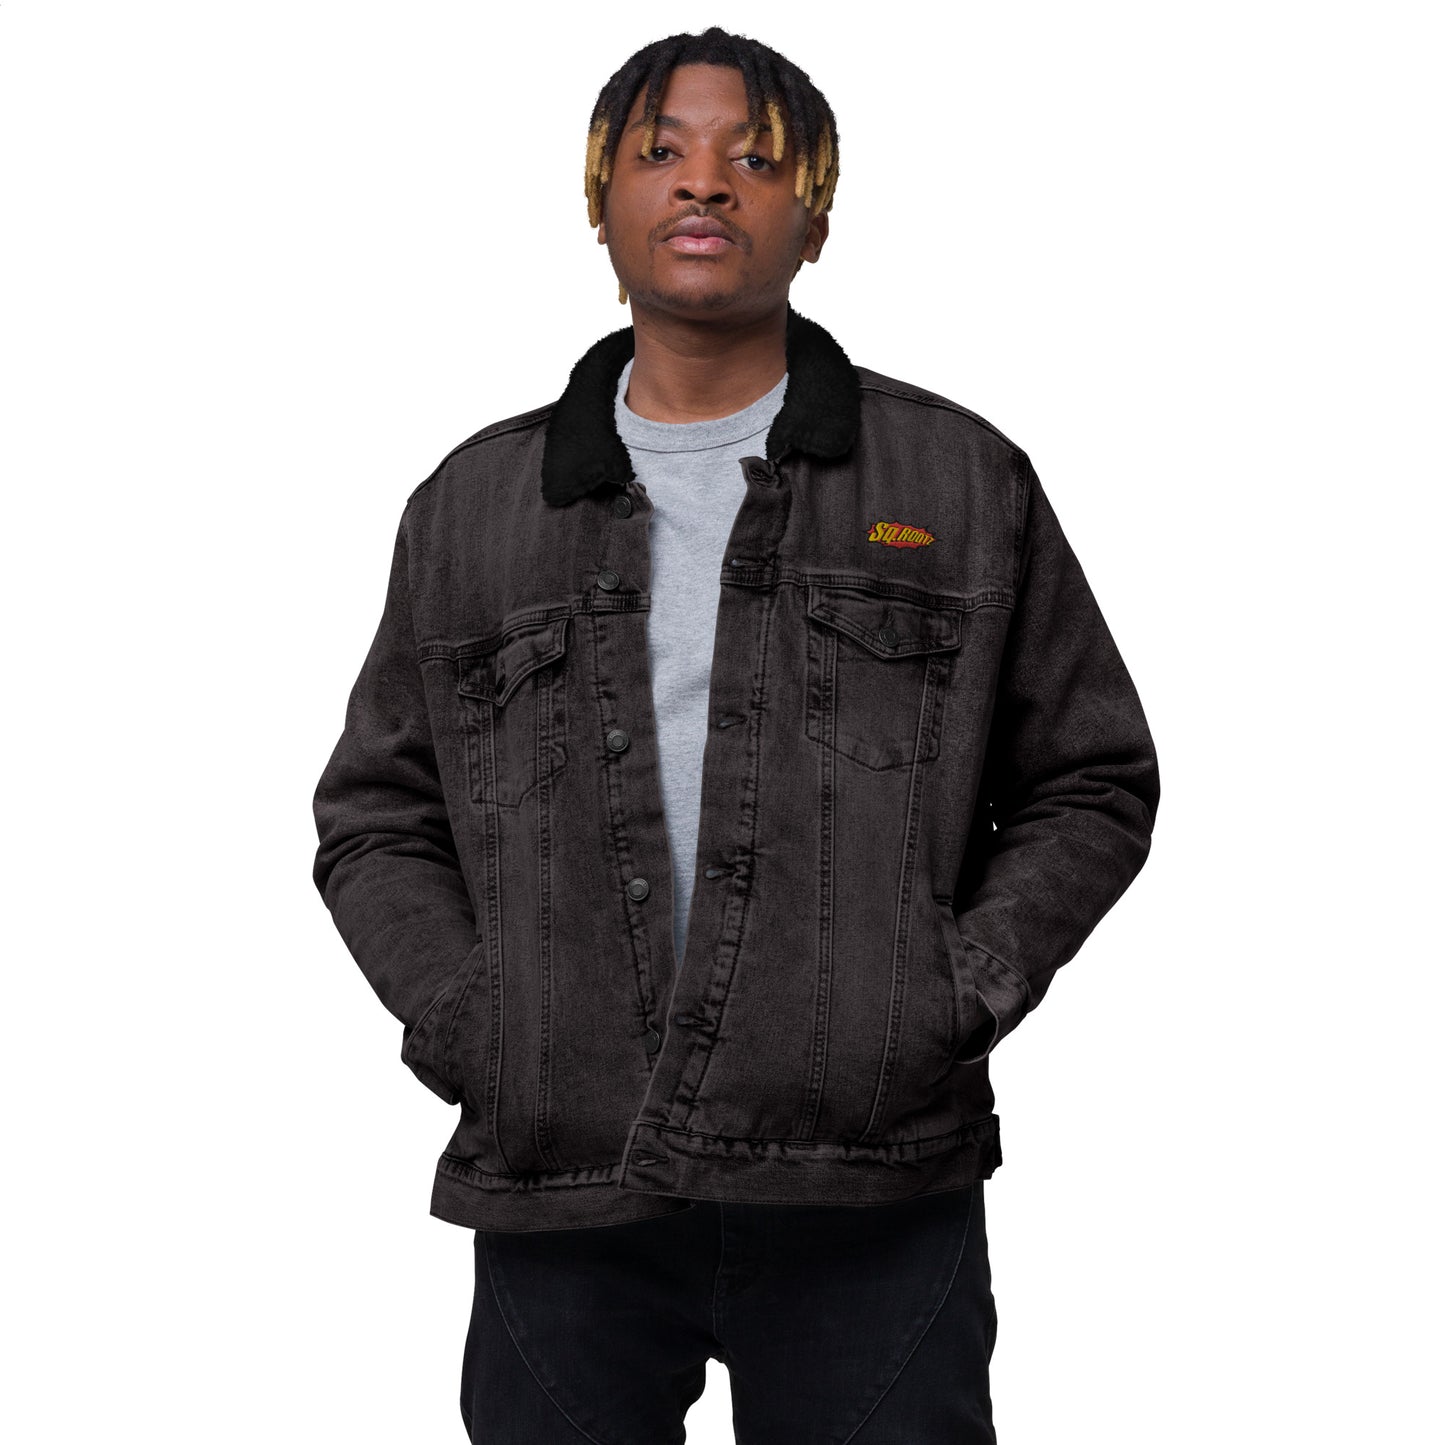 Sq.Rootz Embroidered Sherpa Jacket